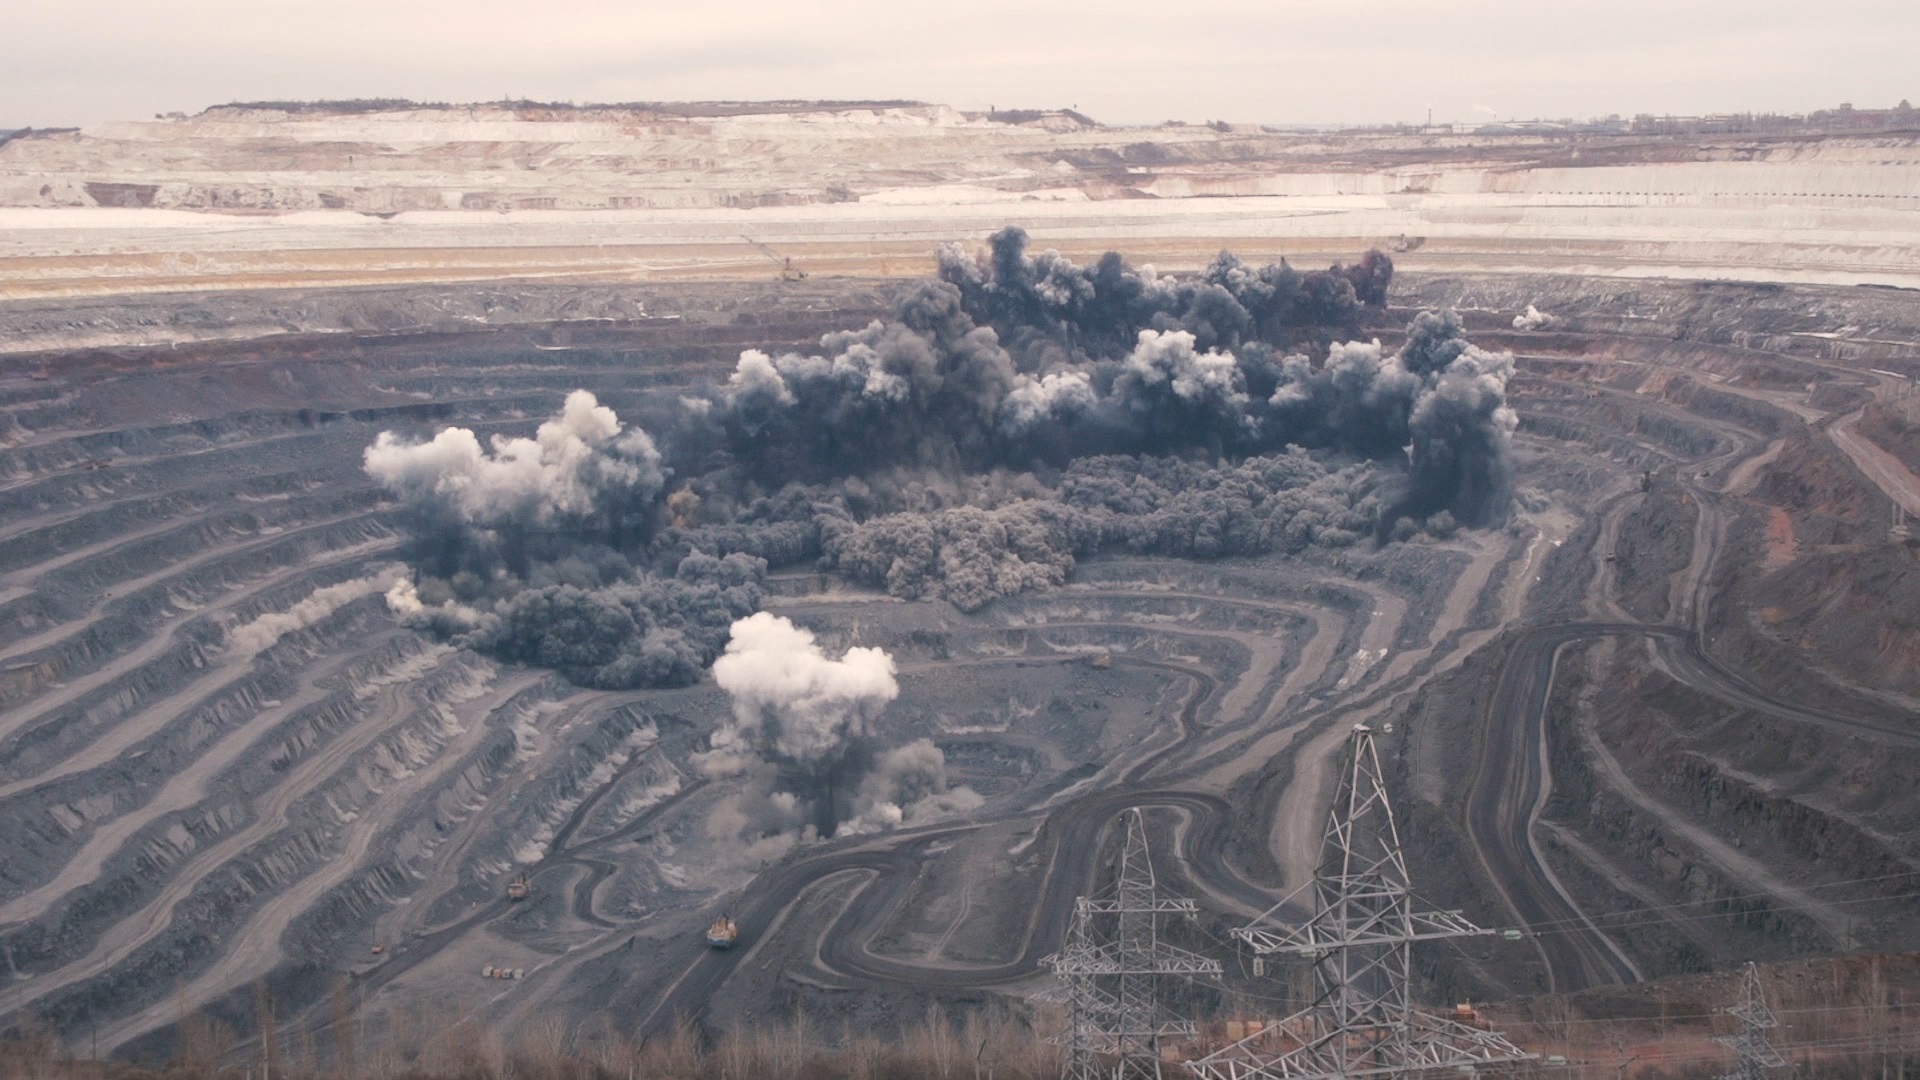 A still from the film "Extractions" by Thirza Cuthand. The still features a mining blast, shot from an aerial view. Large plumes of black smoke dot the landscape, with construction and mining equipment littered about the scene.